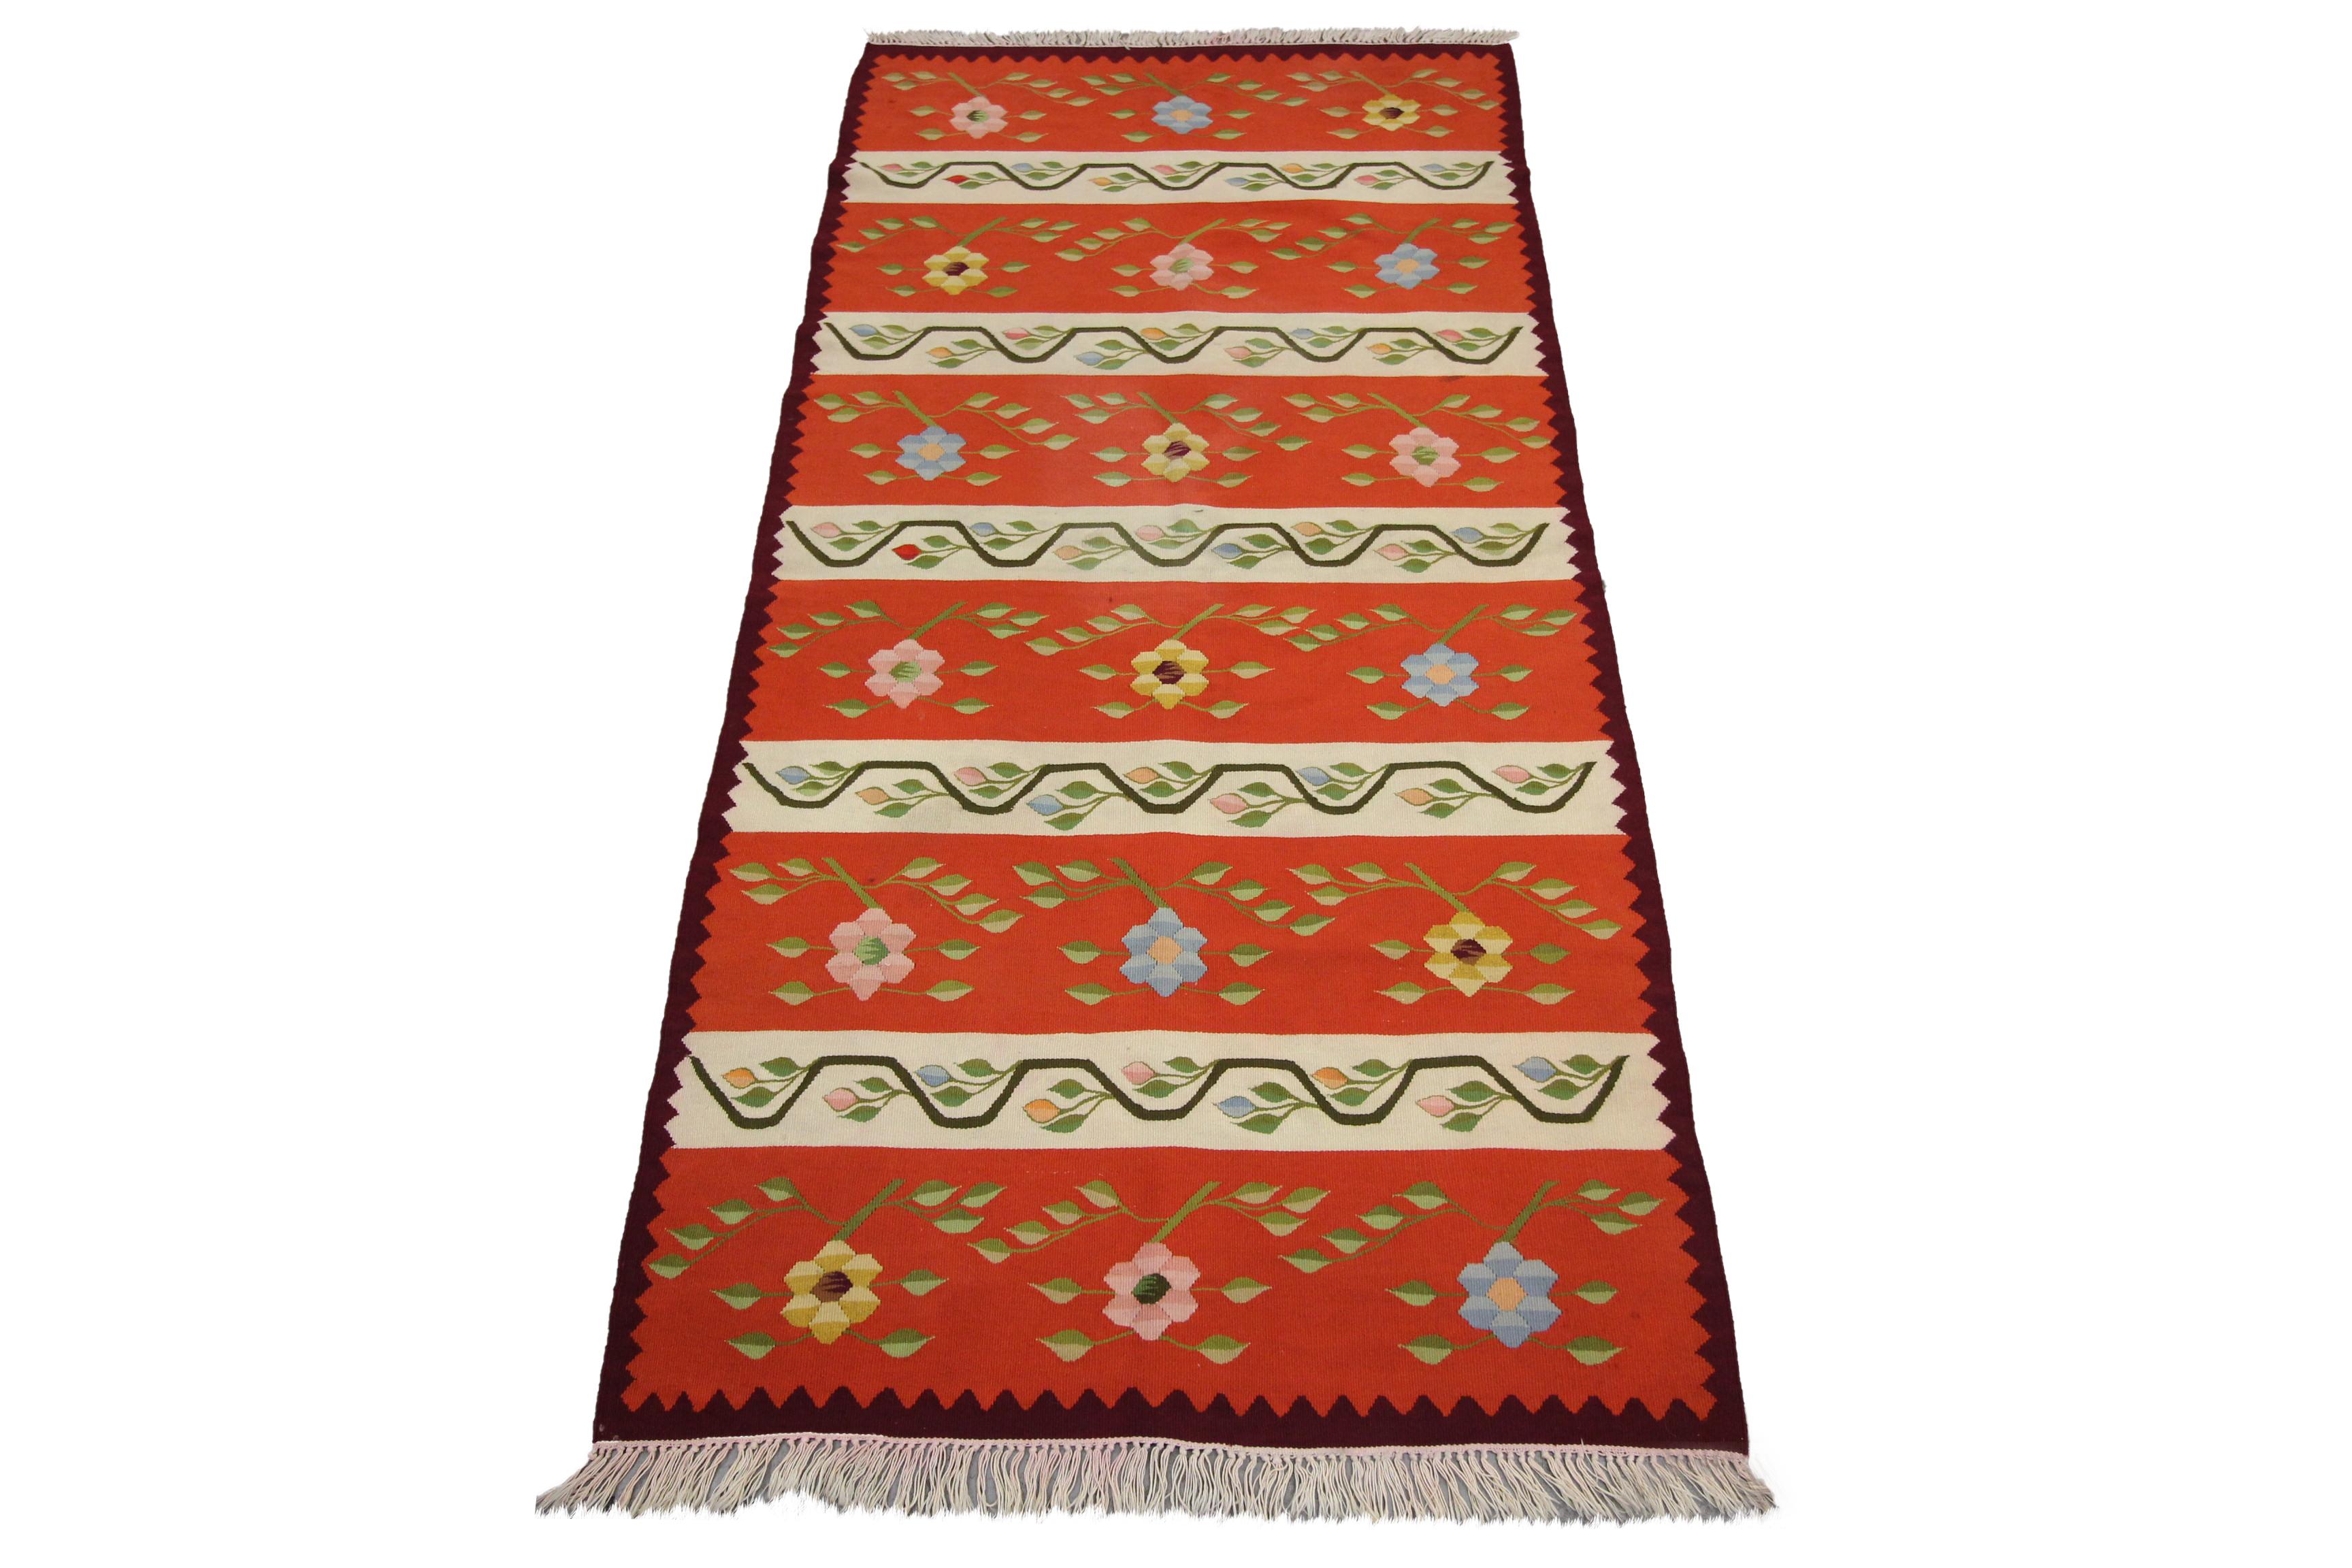 This fine wool rug is a vintage kilim that was woven by hand in the mid-20th century, circa 1960. Woven with a bold red, rust and brown colour palette with a simple stripe design. Both the simple stripe design and bold colour palette make it the